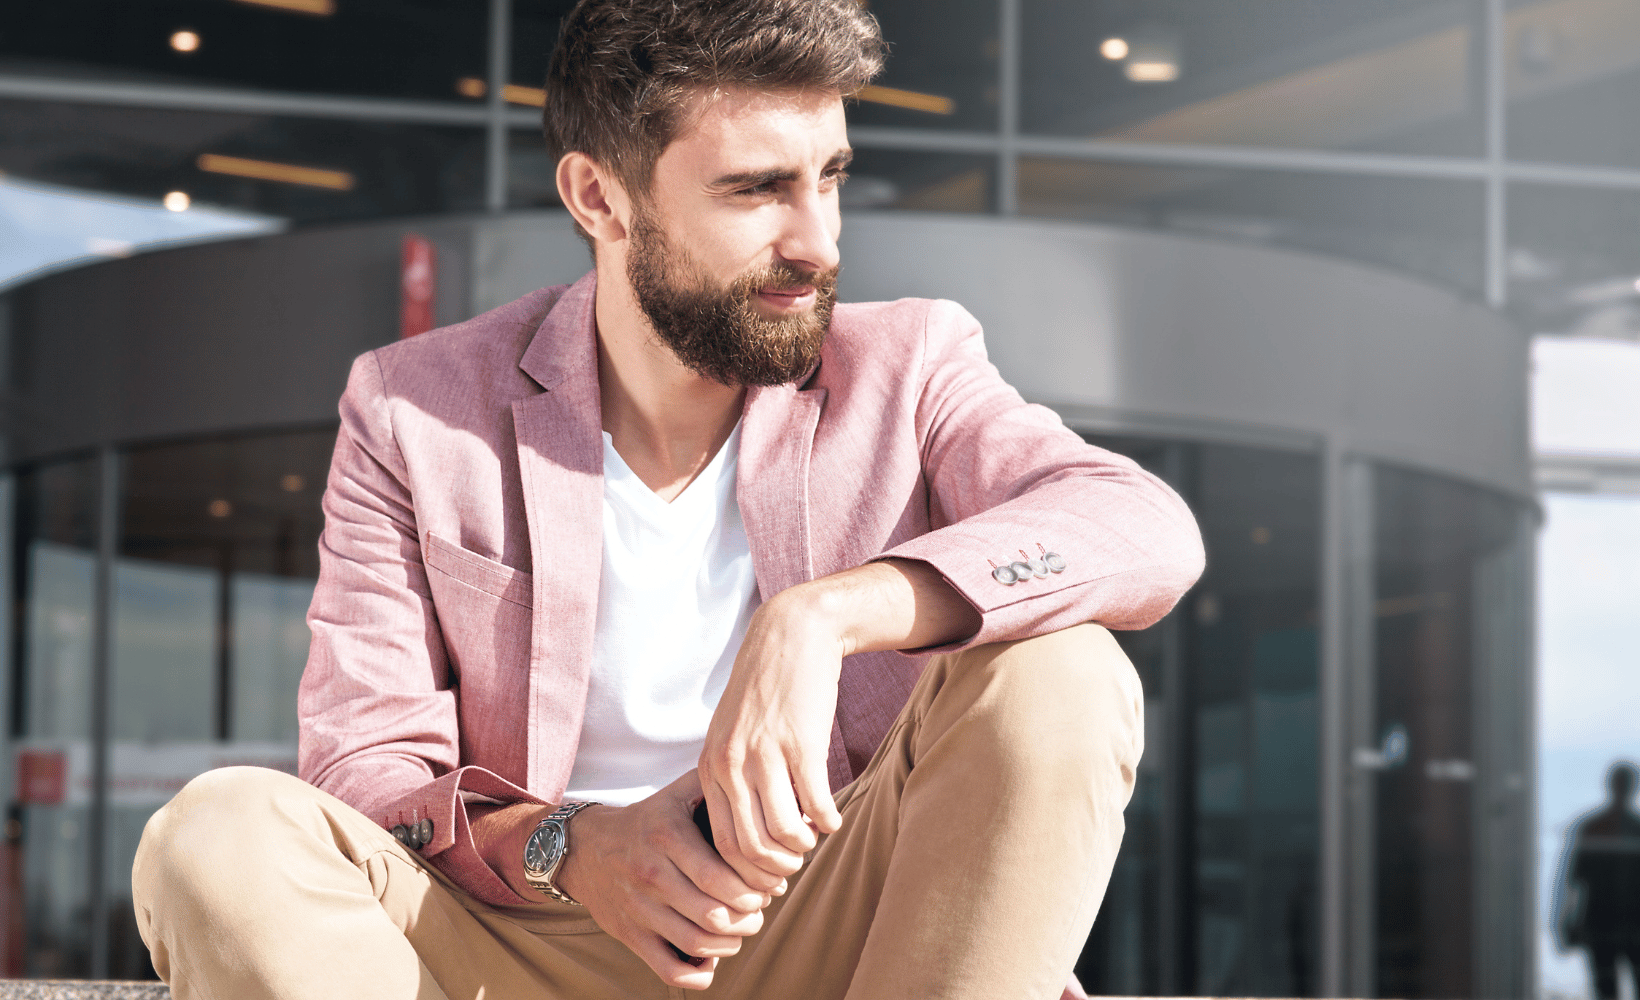 Clean Cut Kenny hero image - man in pink suit jacket and khaki pants